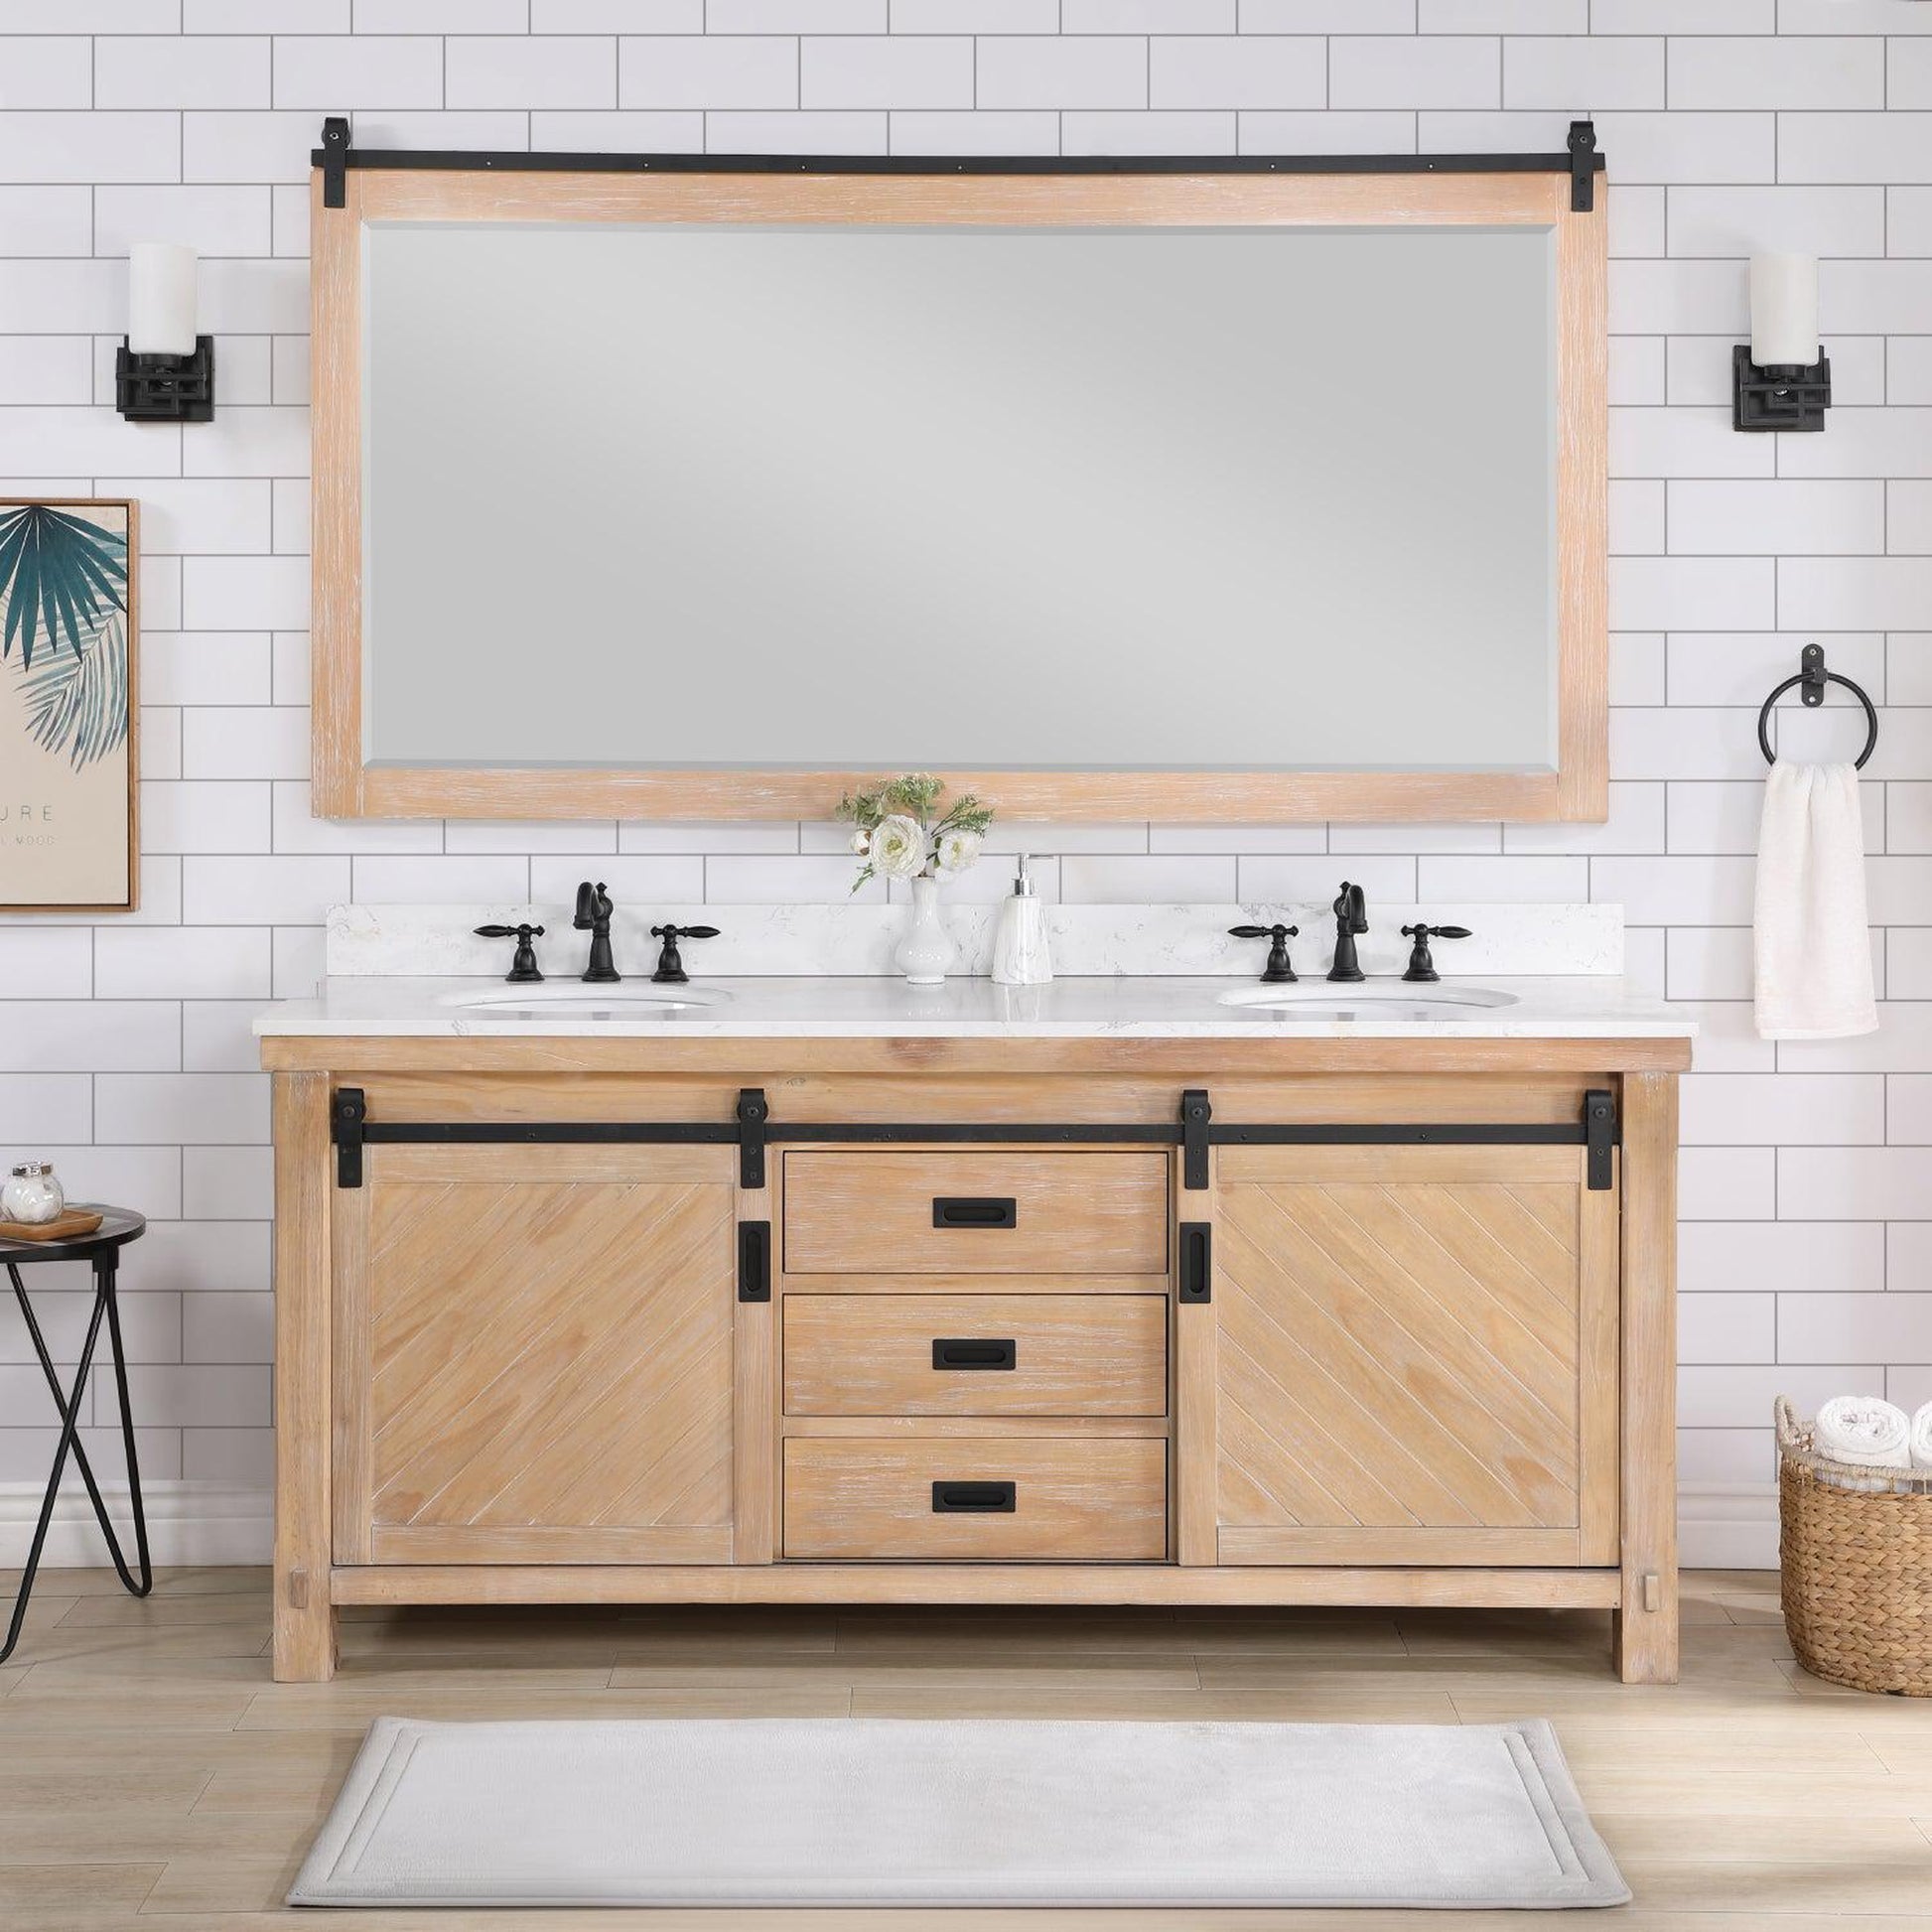 Vinnova Cortes 72" Double Sink Bath Vanity In Weathered Pine Finish With White Composite Countertop And Mirror